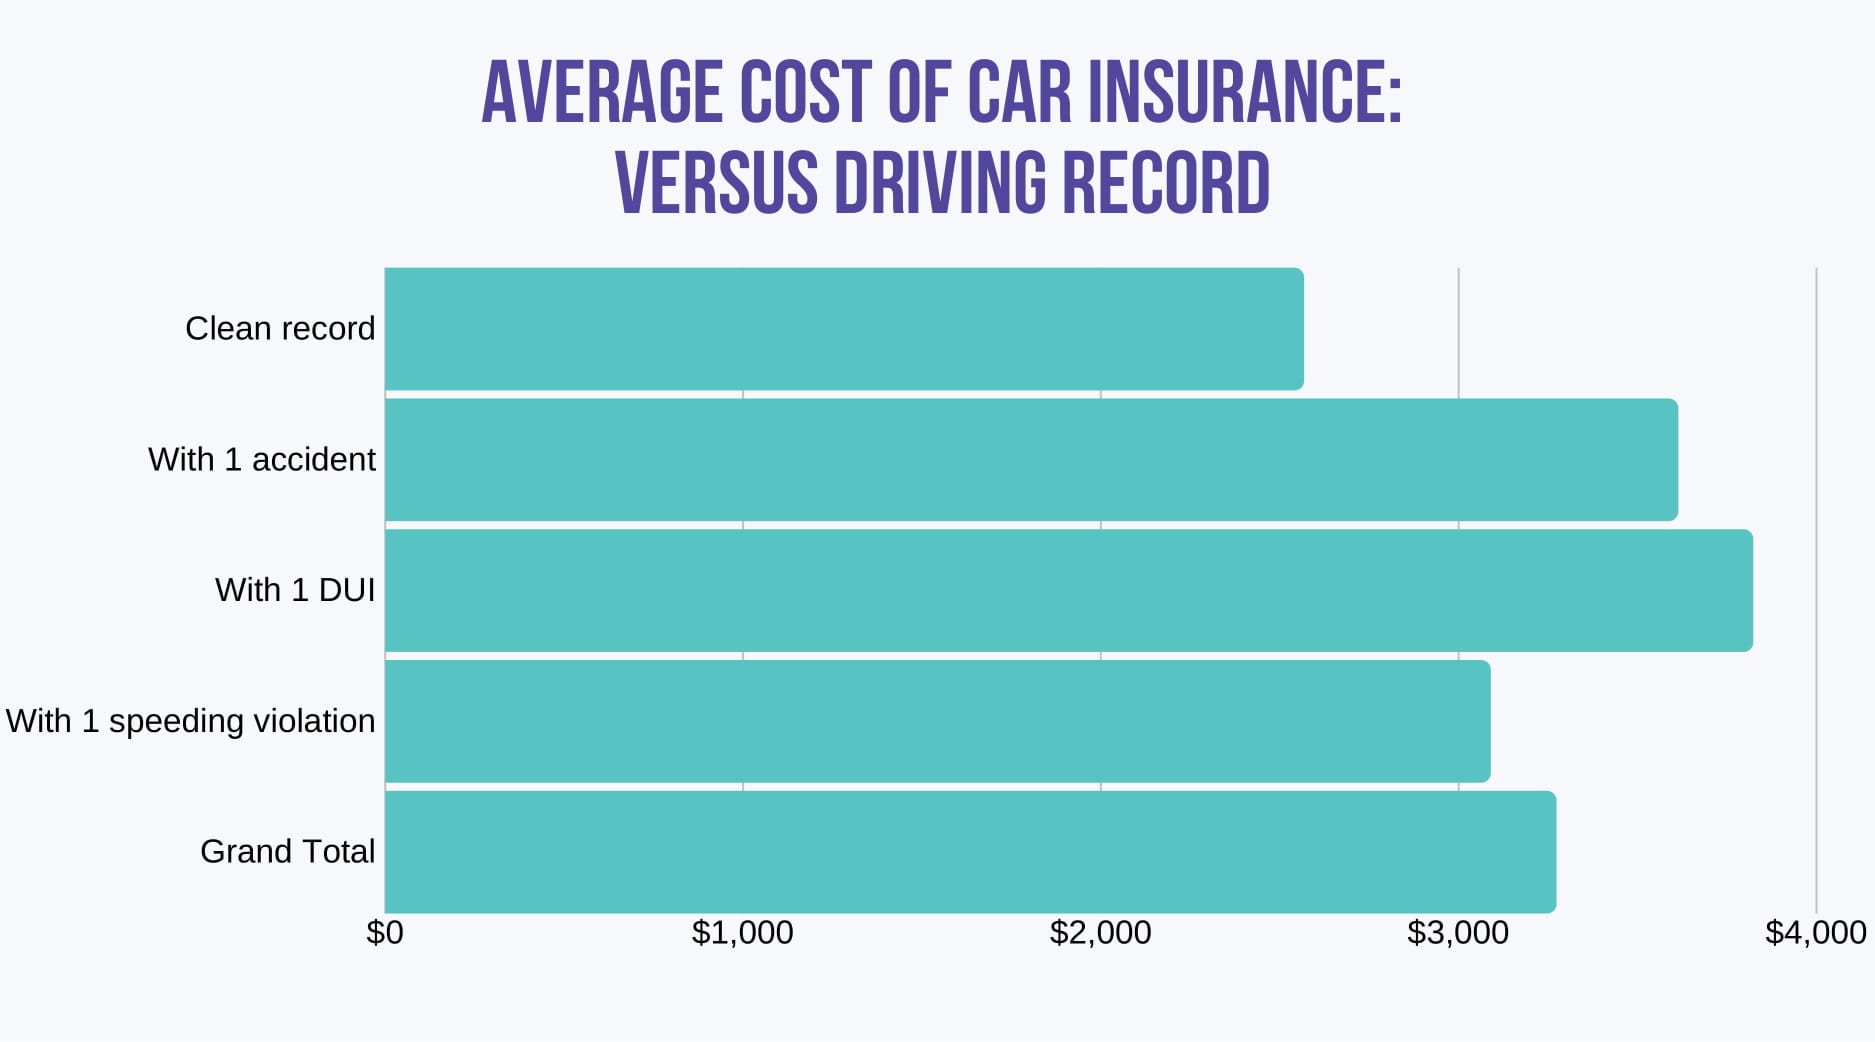 AVERAGE COST OF CAR INSURANCE VERSUS DRIVING RECORD